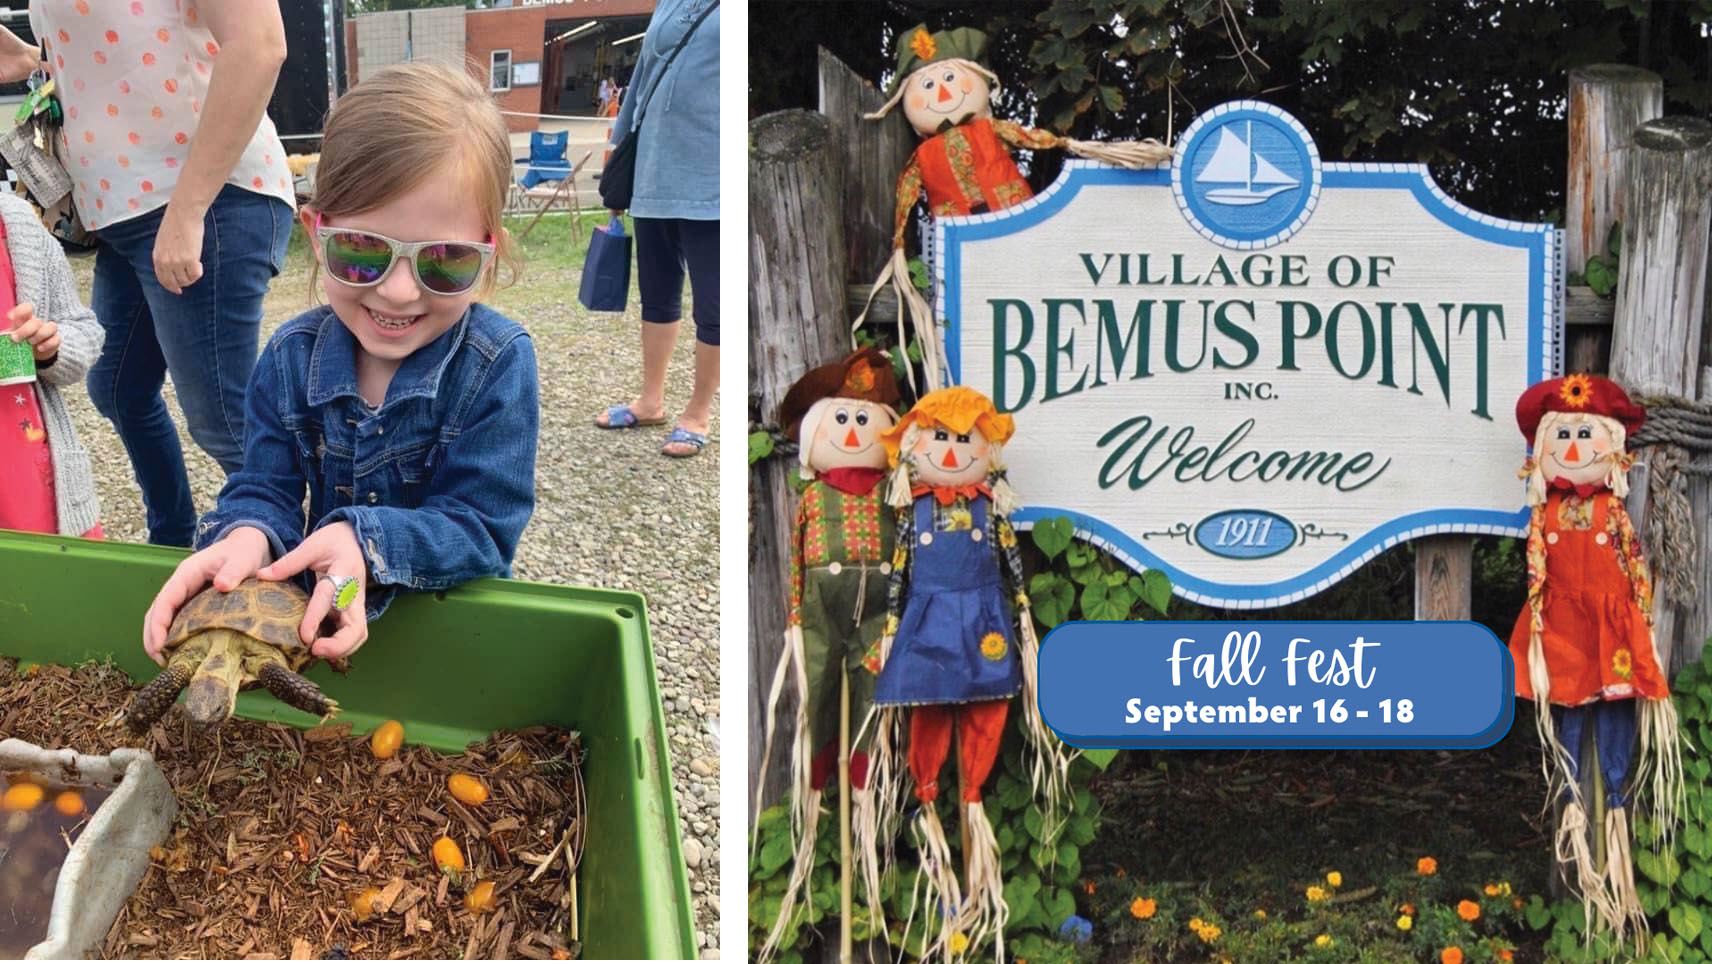 Bemus Point Fall Festival Annual Event Returns this Weekend September